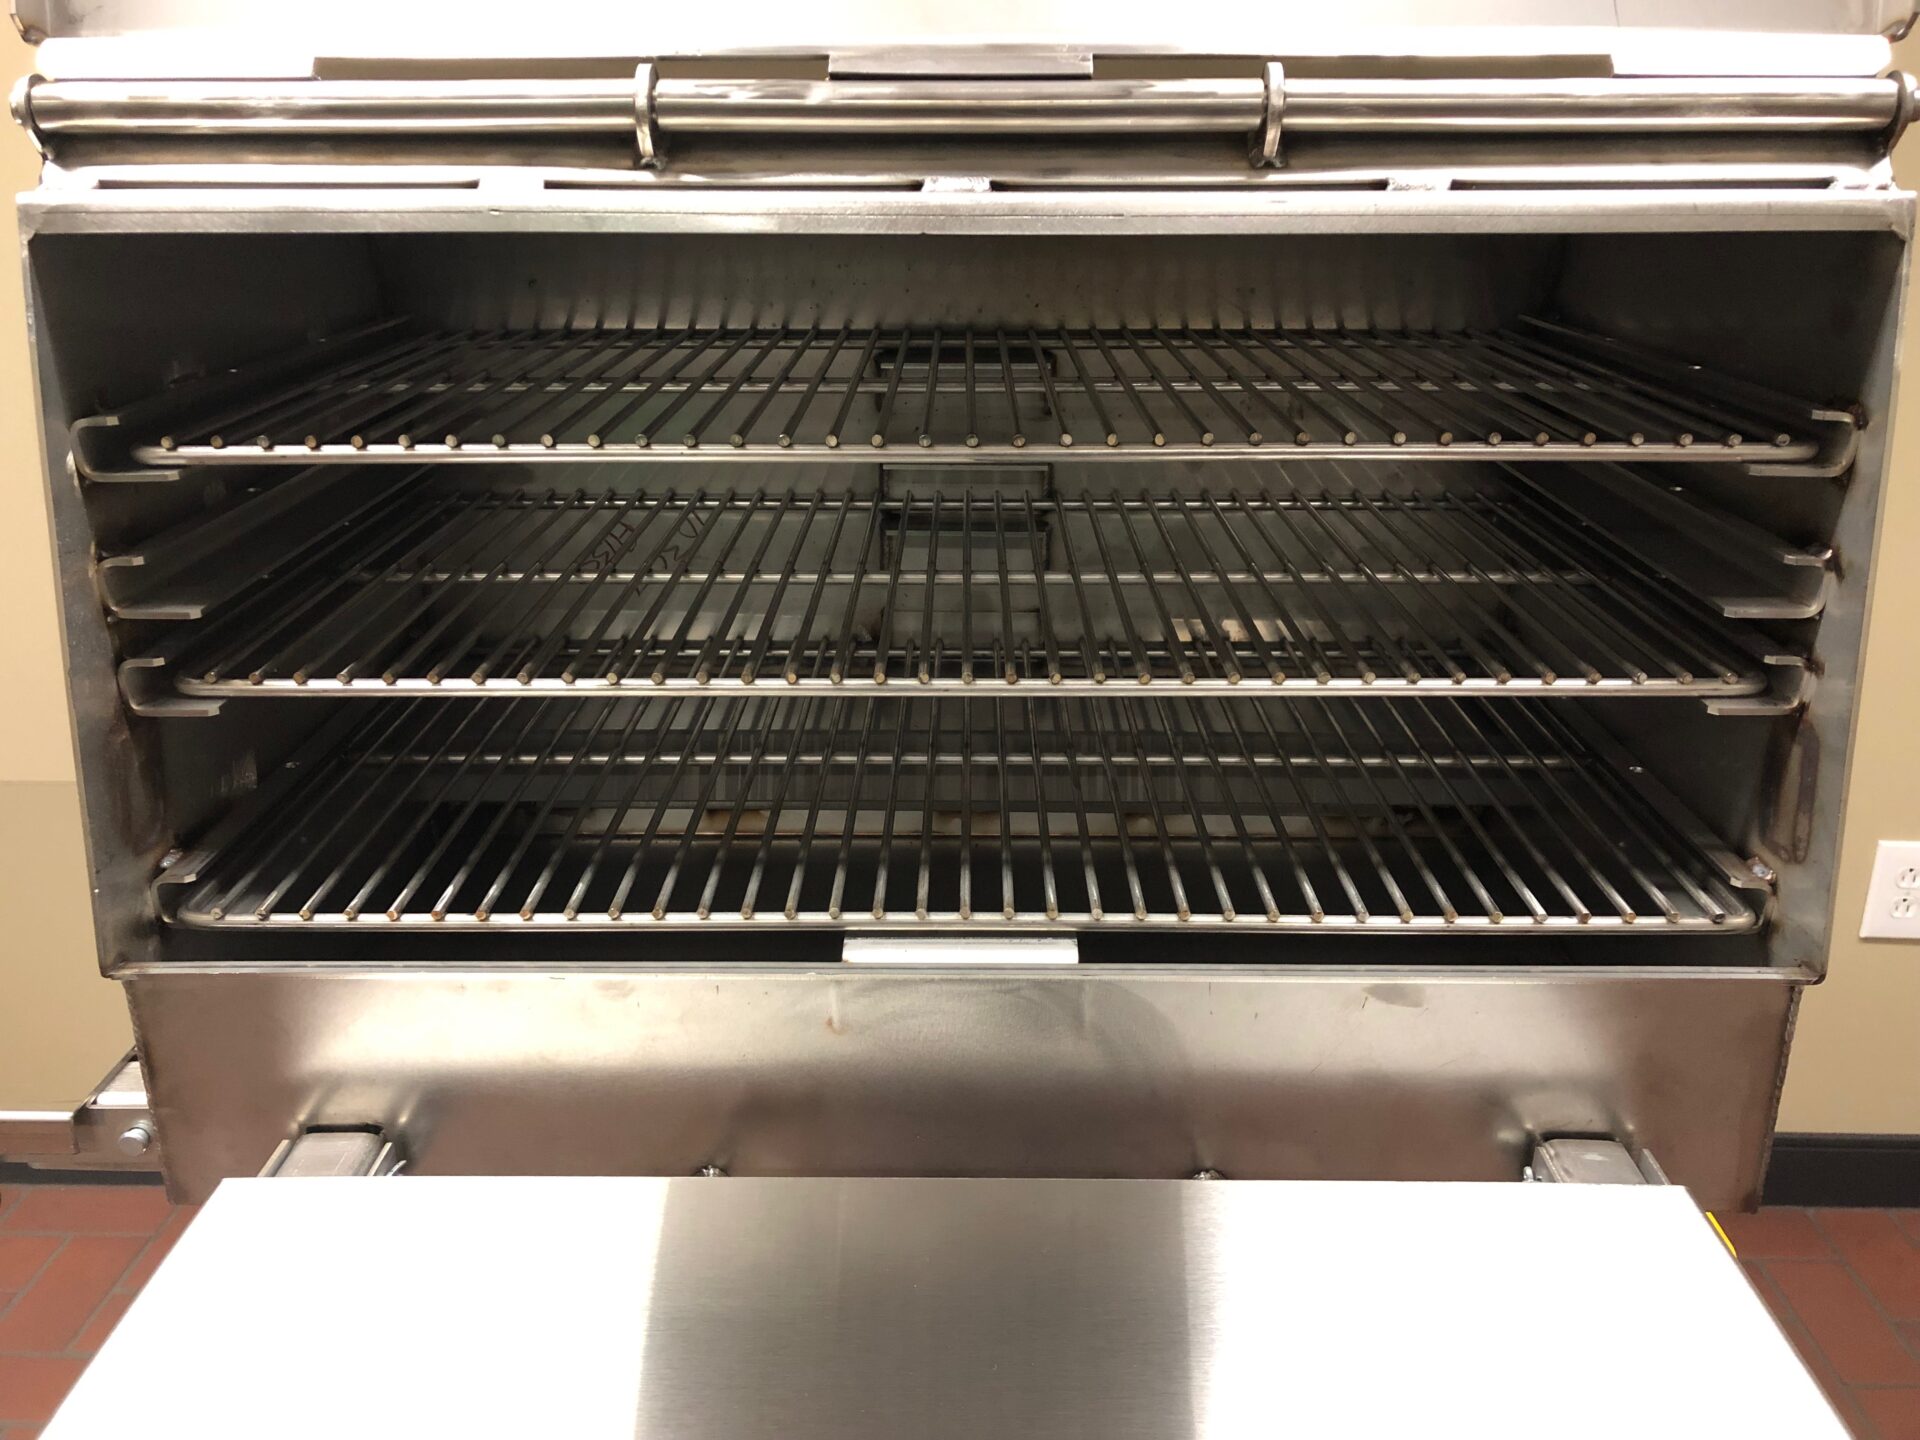 Stainless All Star - open with grill racks